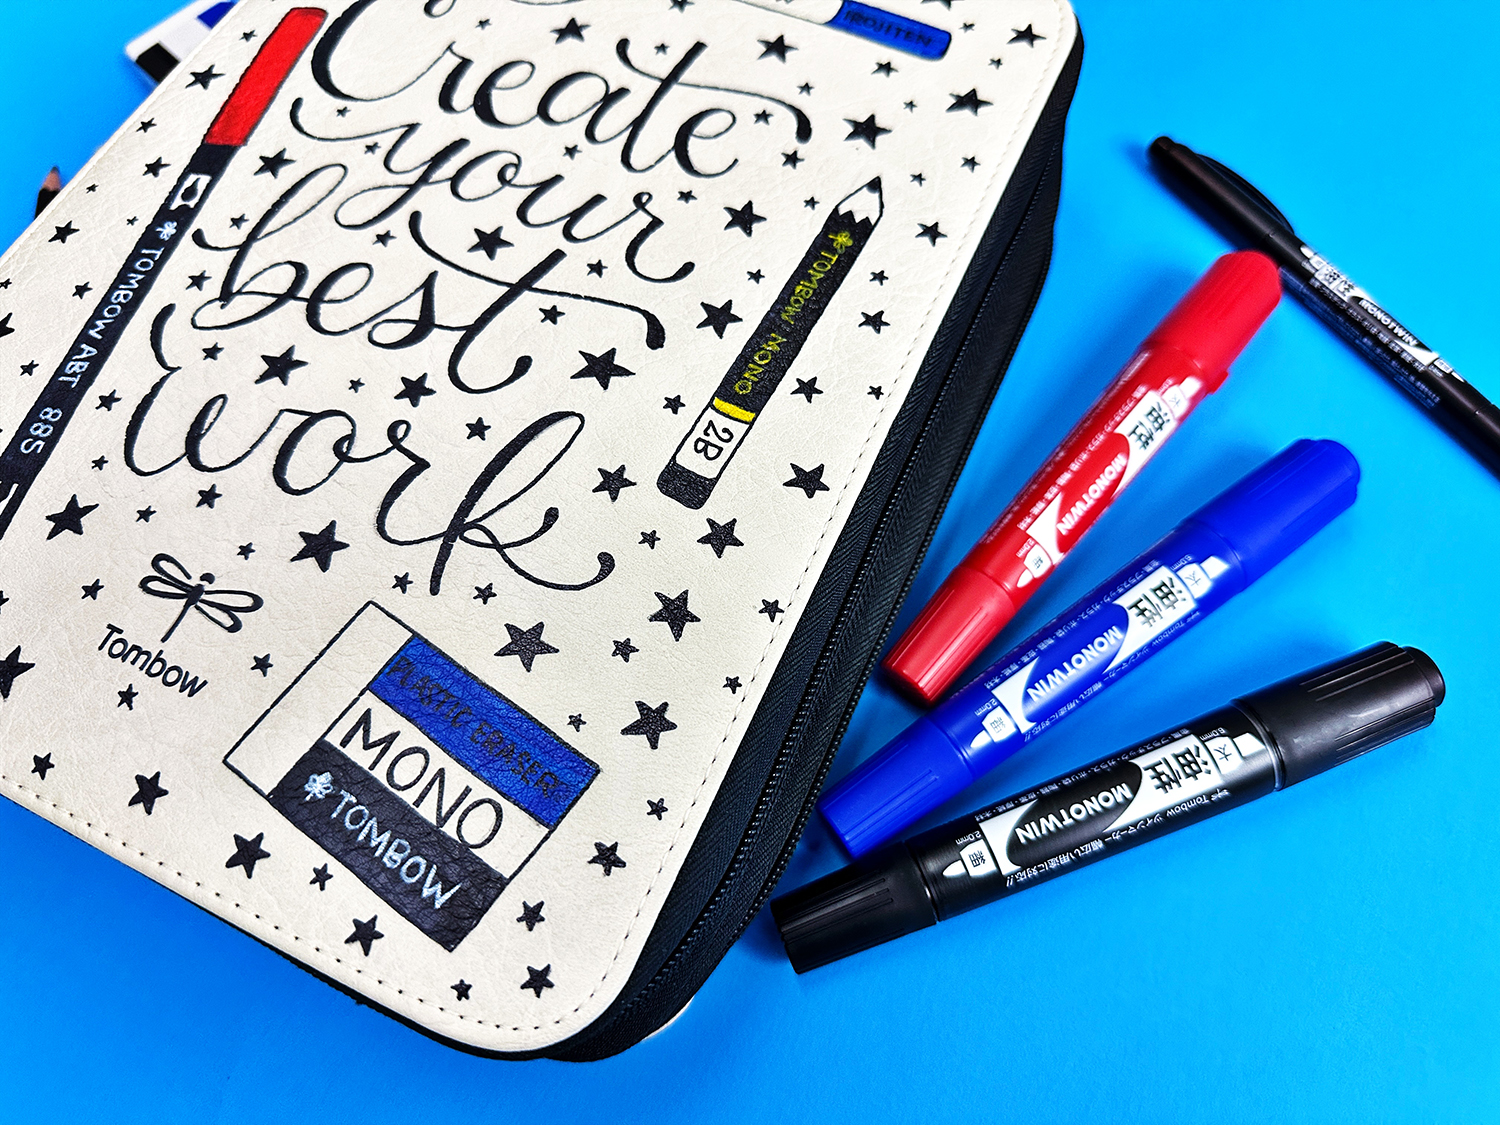 Use the Tombow MONO Drawing Pens to customize the Tombow Zippered Marker Storage Case! #tombow #planner